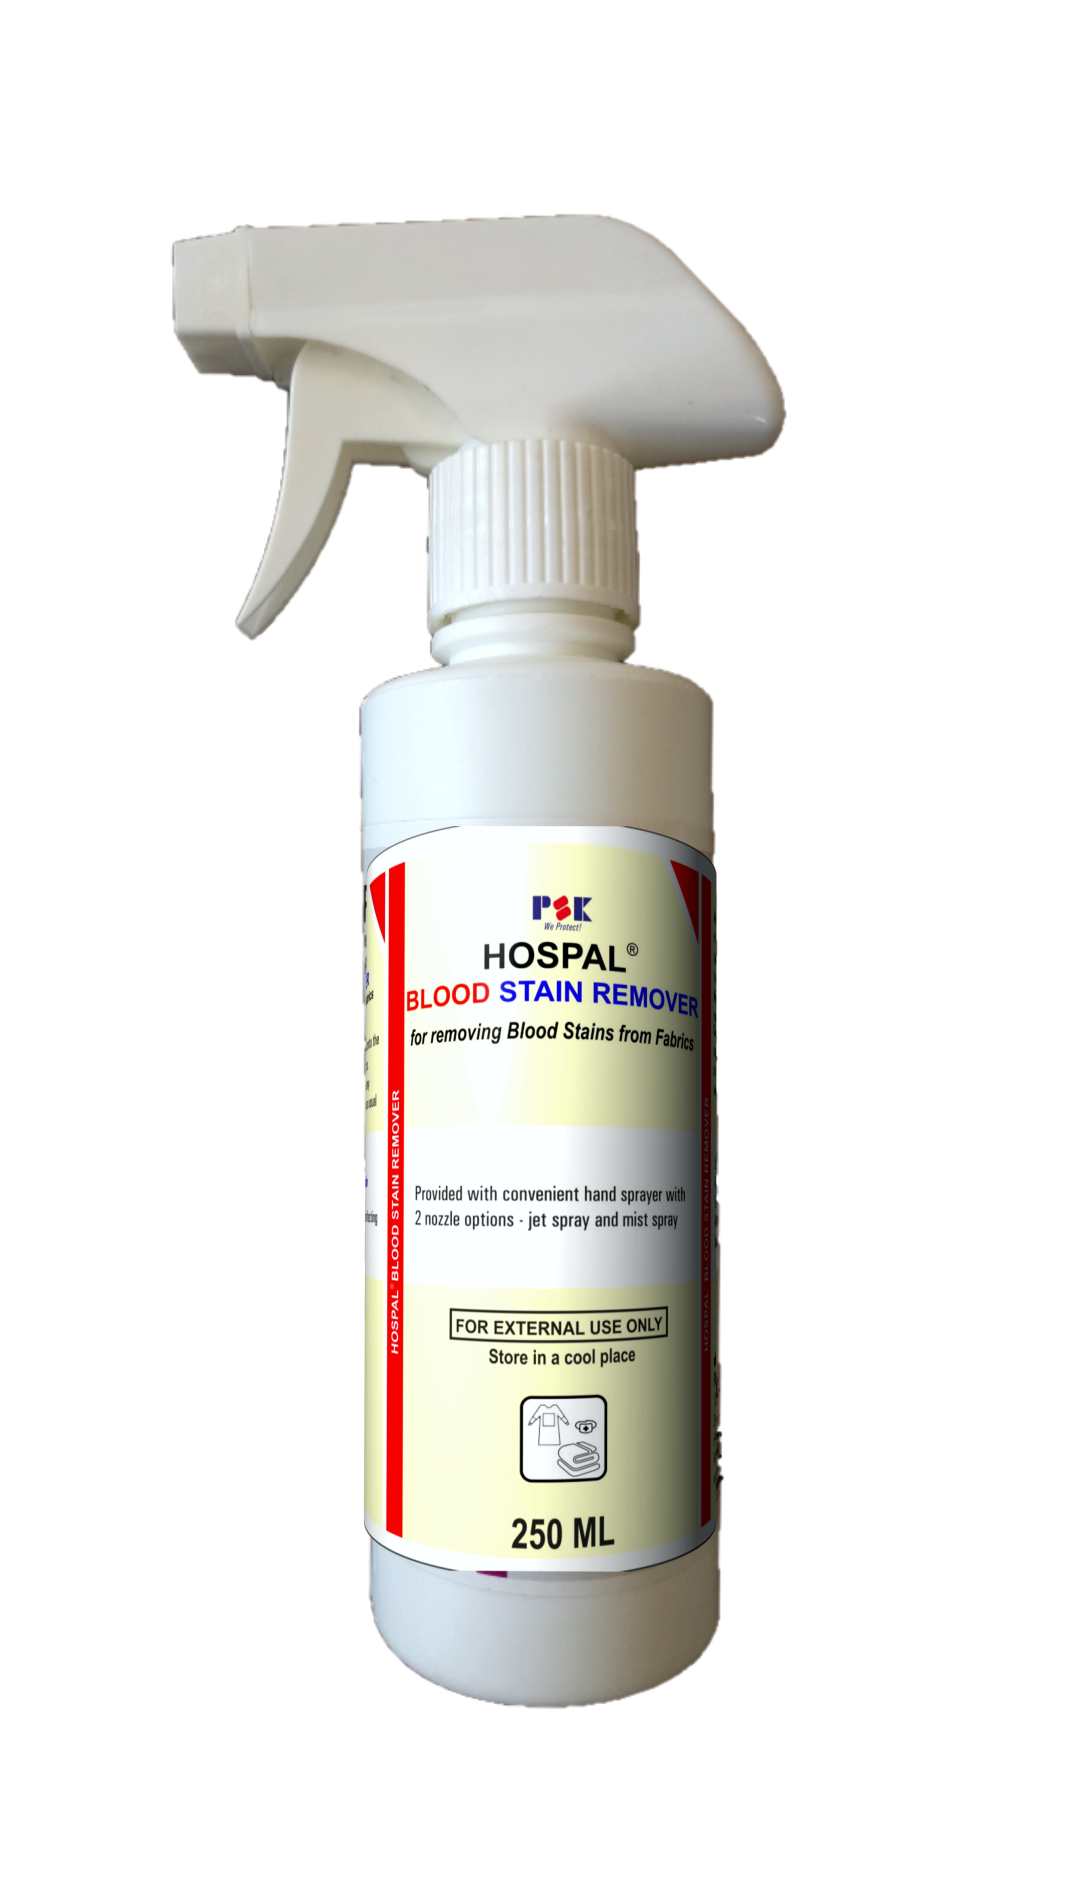 Hospal Blood Stain Remover